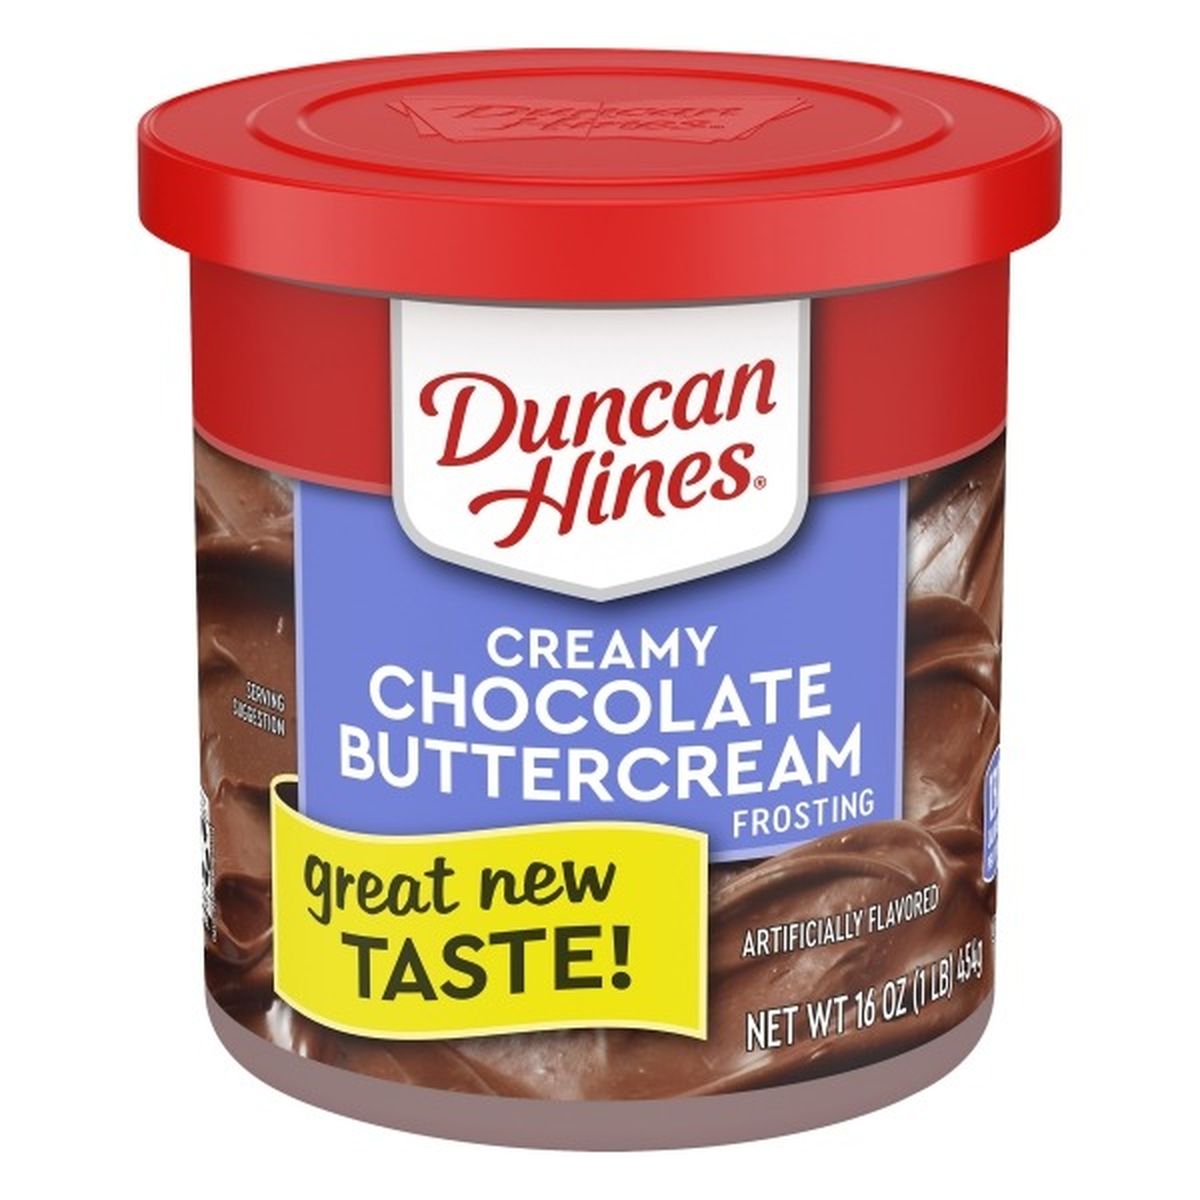 Calories in Duncan Hines Frosting, Chocolate Buttercream, Creamy